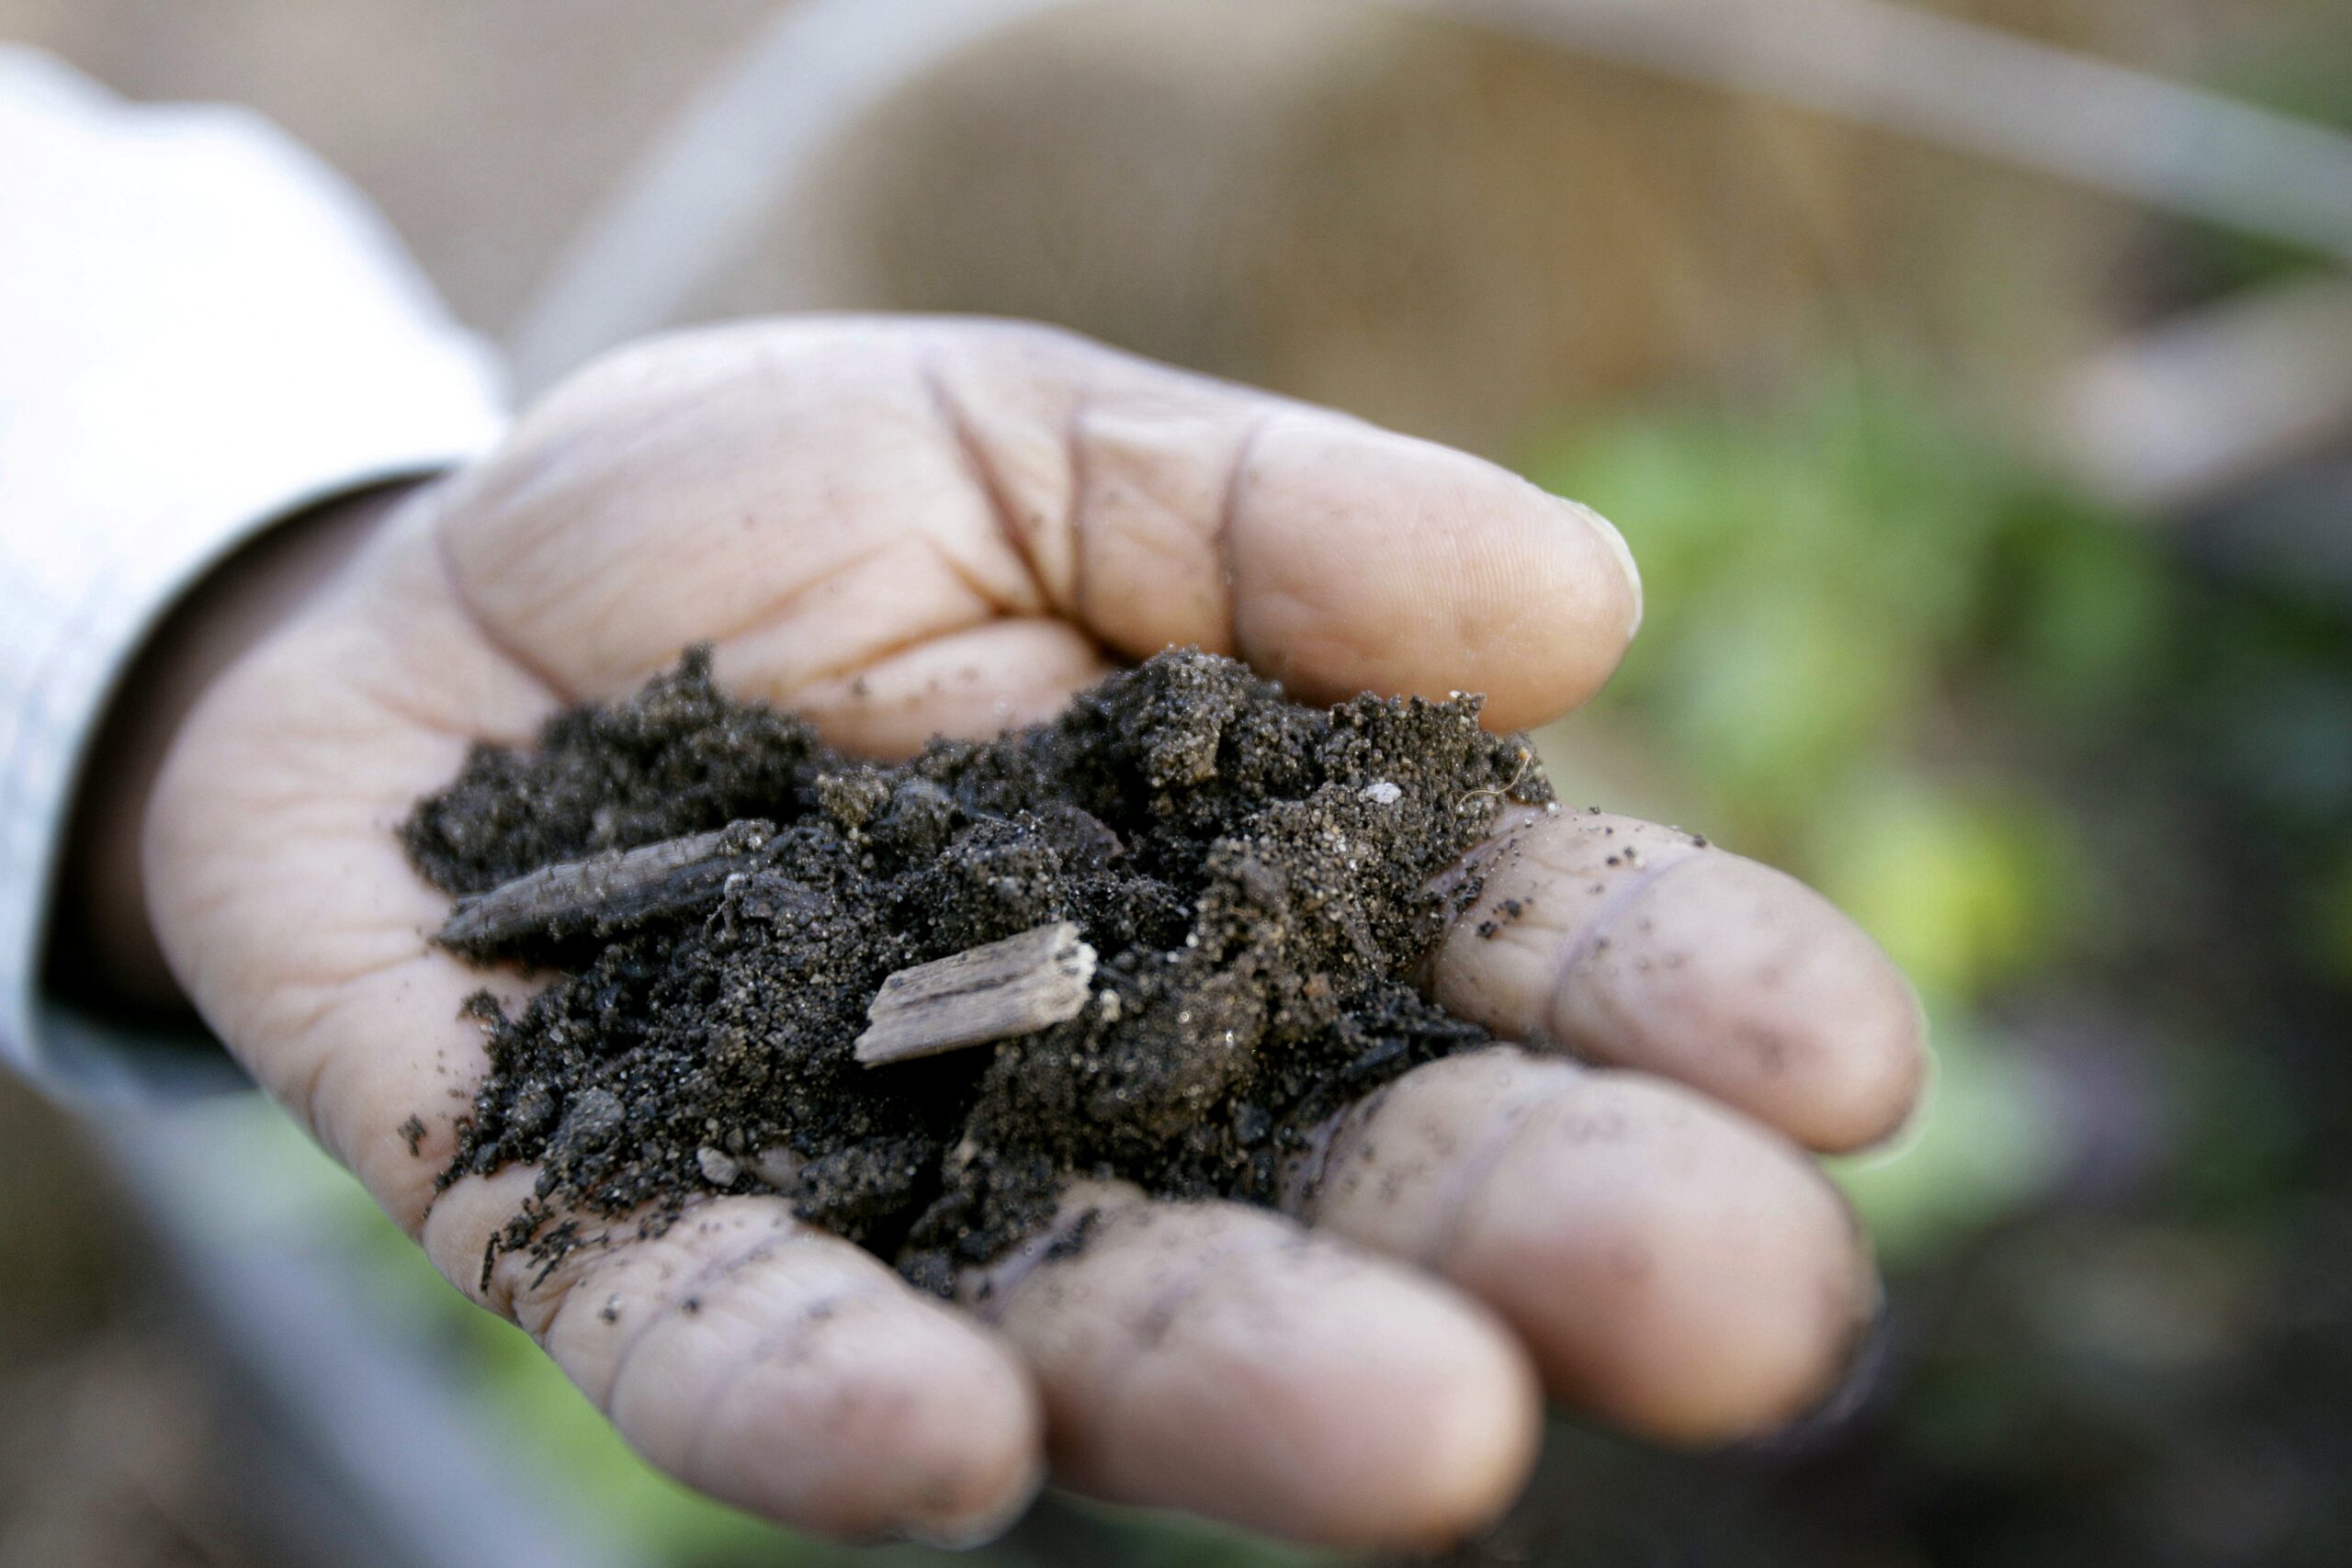 A handful of compost from a community farm in the Bronx